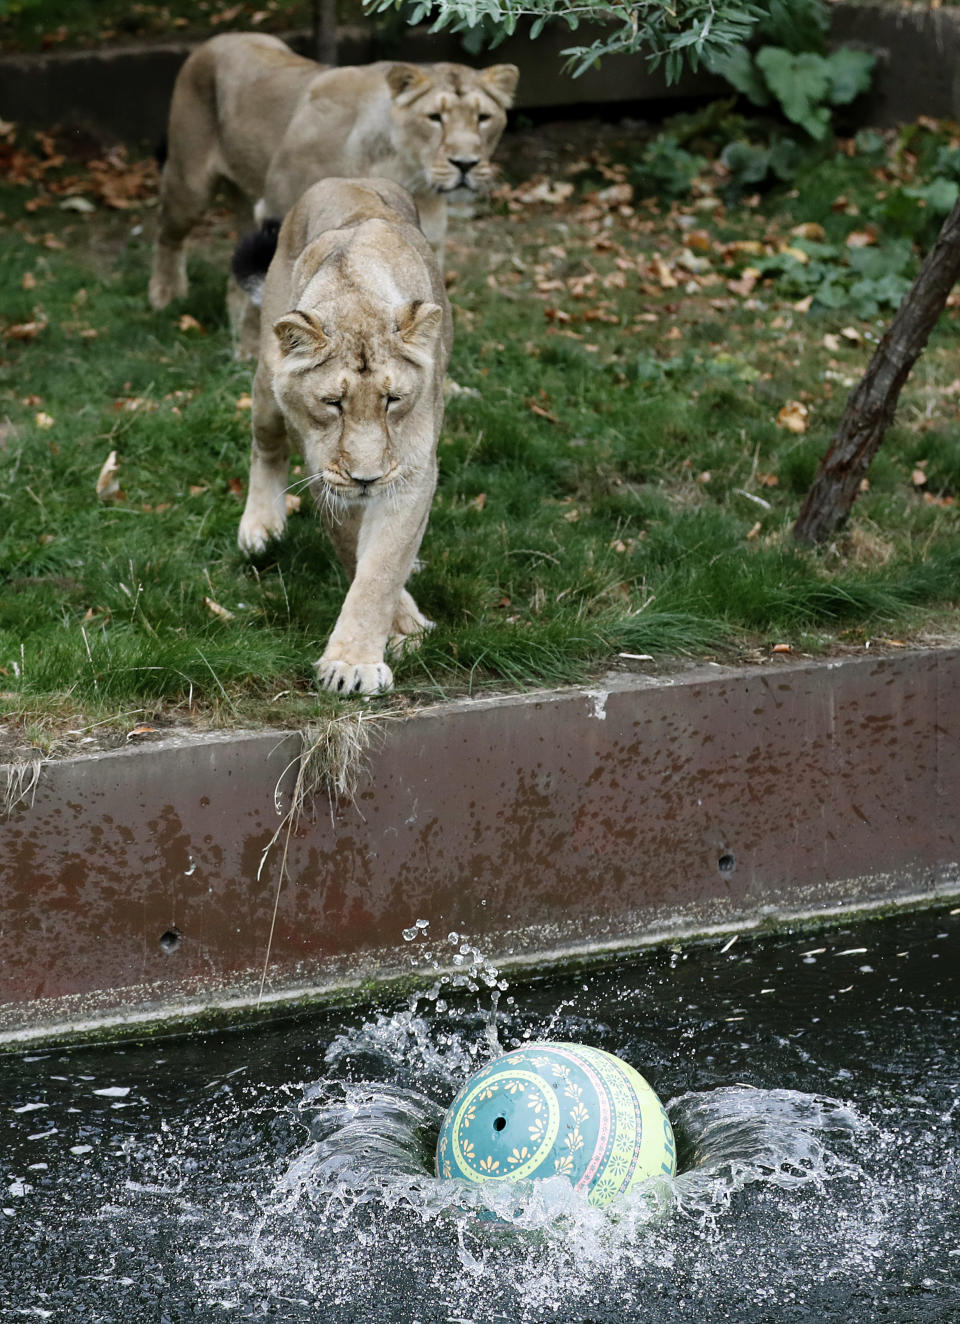 London Zoo's lionesses watch a ball in the water, a day ahead of World Lion Day in London, Thursday, Aug. 9, 2018. The pride will be celebrating conservation success as Asiatic lions numbers continue to increase. (AP Photo/Frank Augstein)